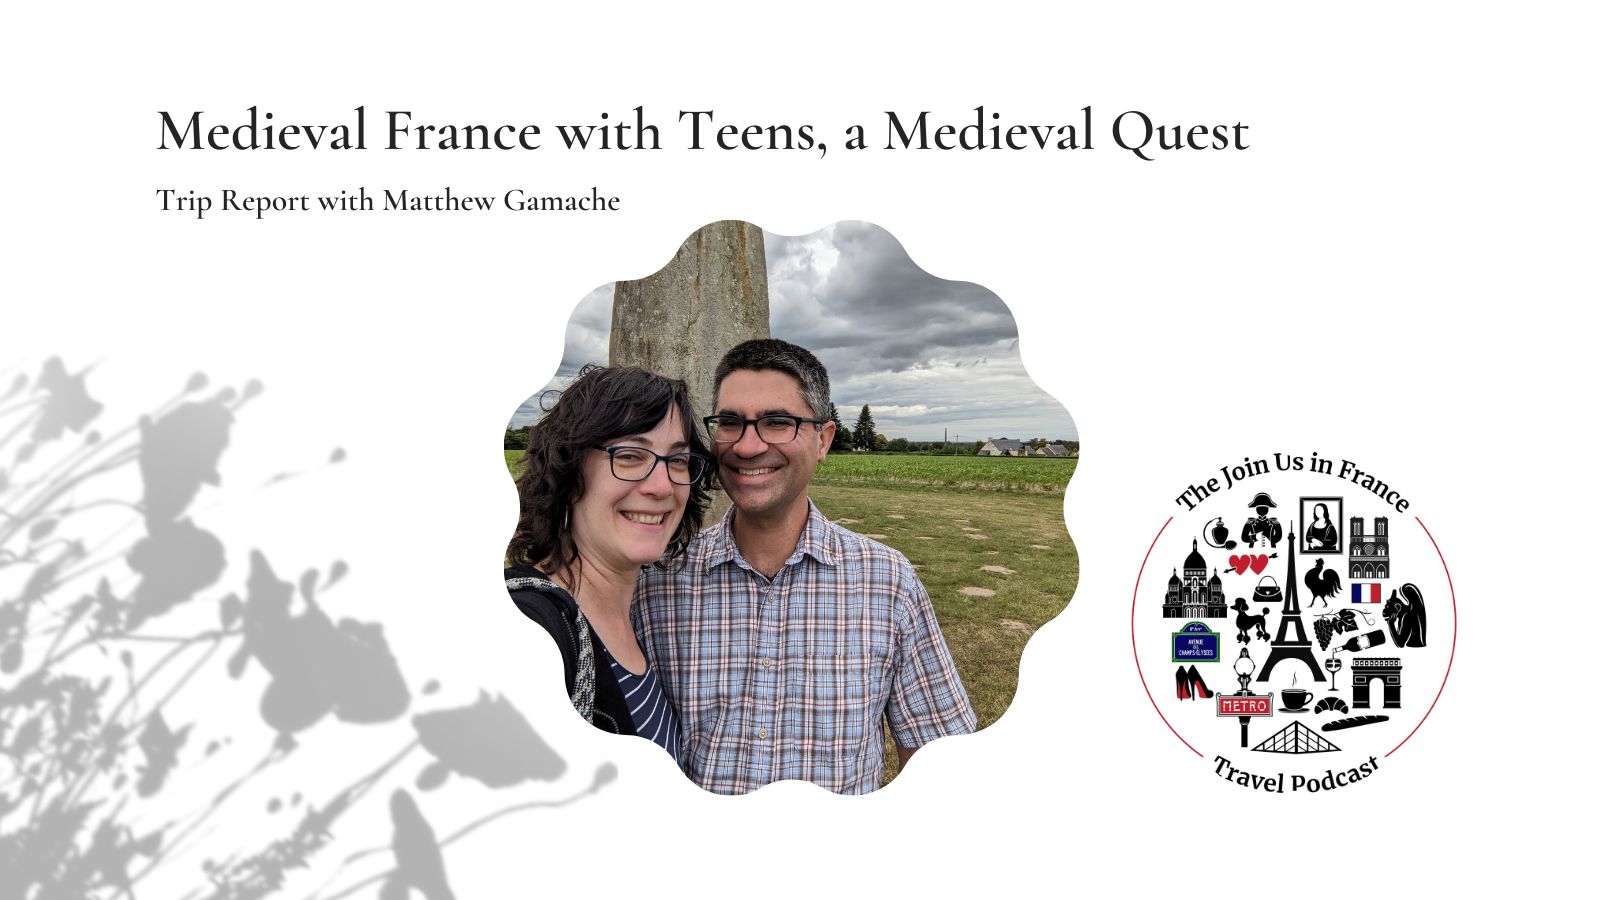 Matthew and his wife in Brittany: Medieval France with Teens episode